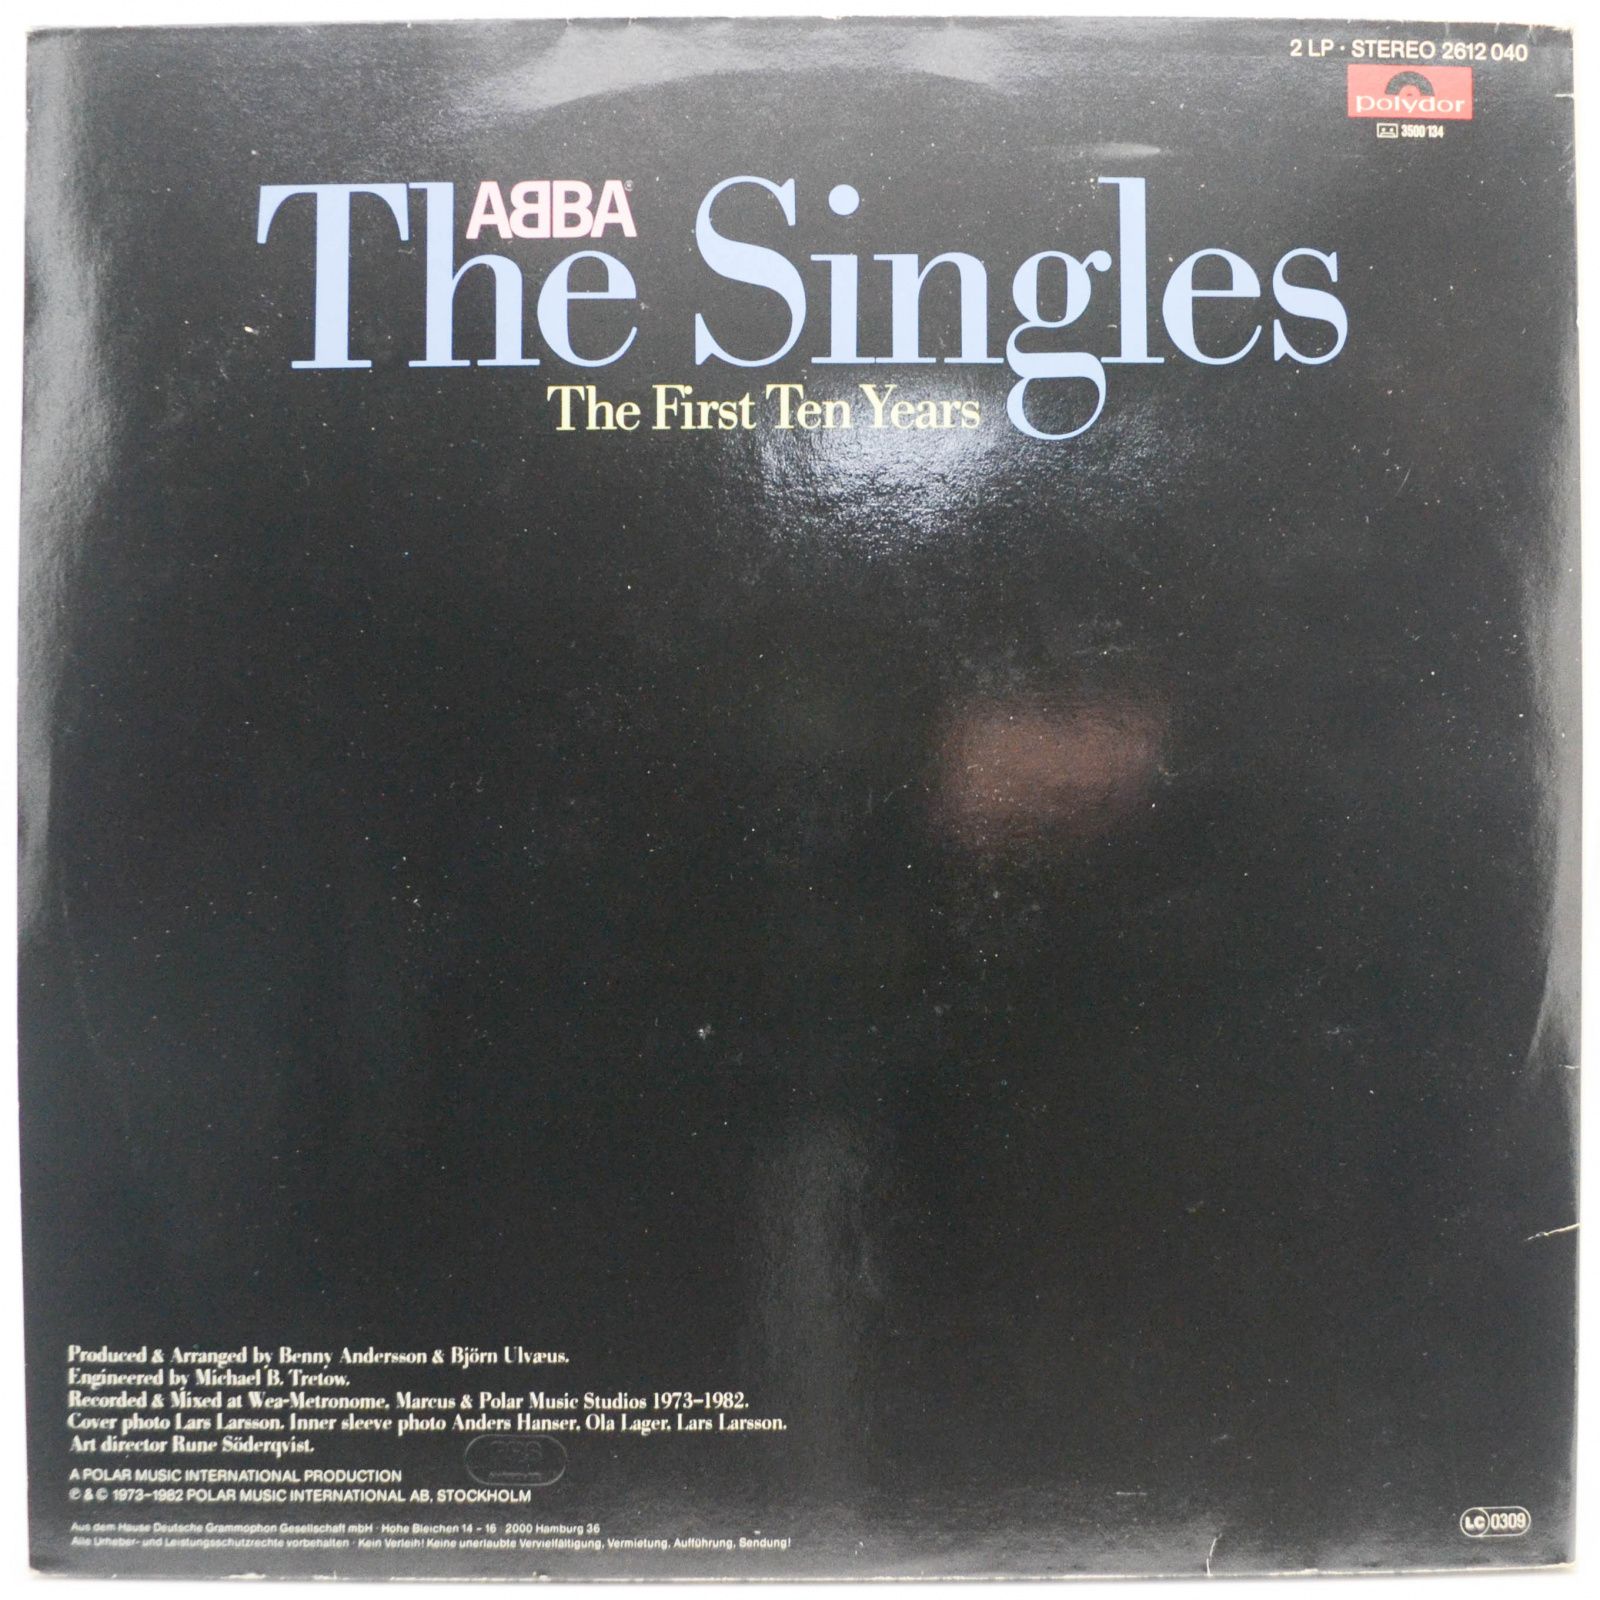 ABBA — The Singles (The First Ten Years) (2LP), 1982